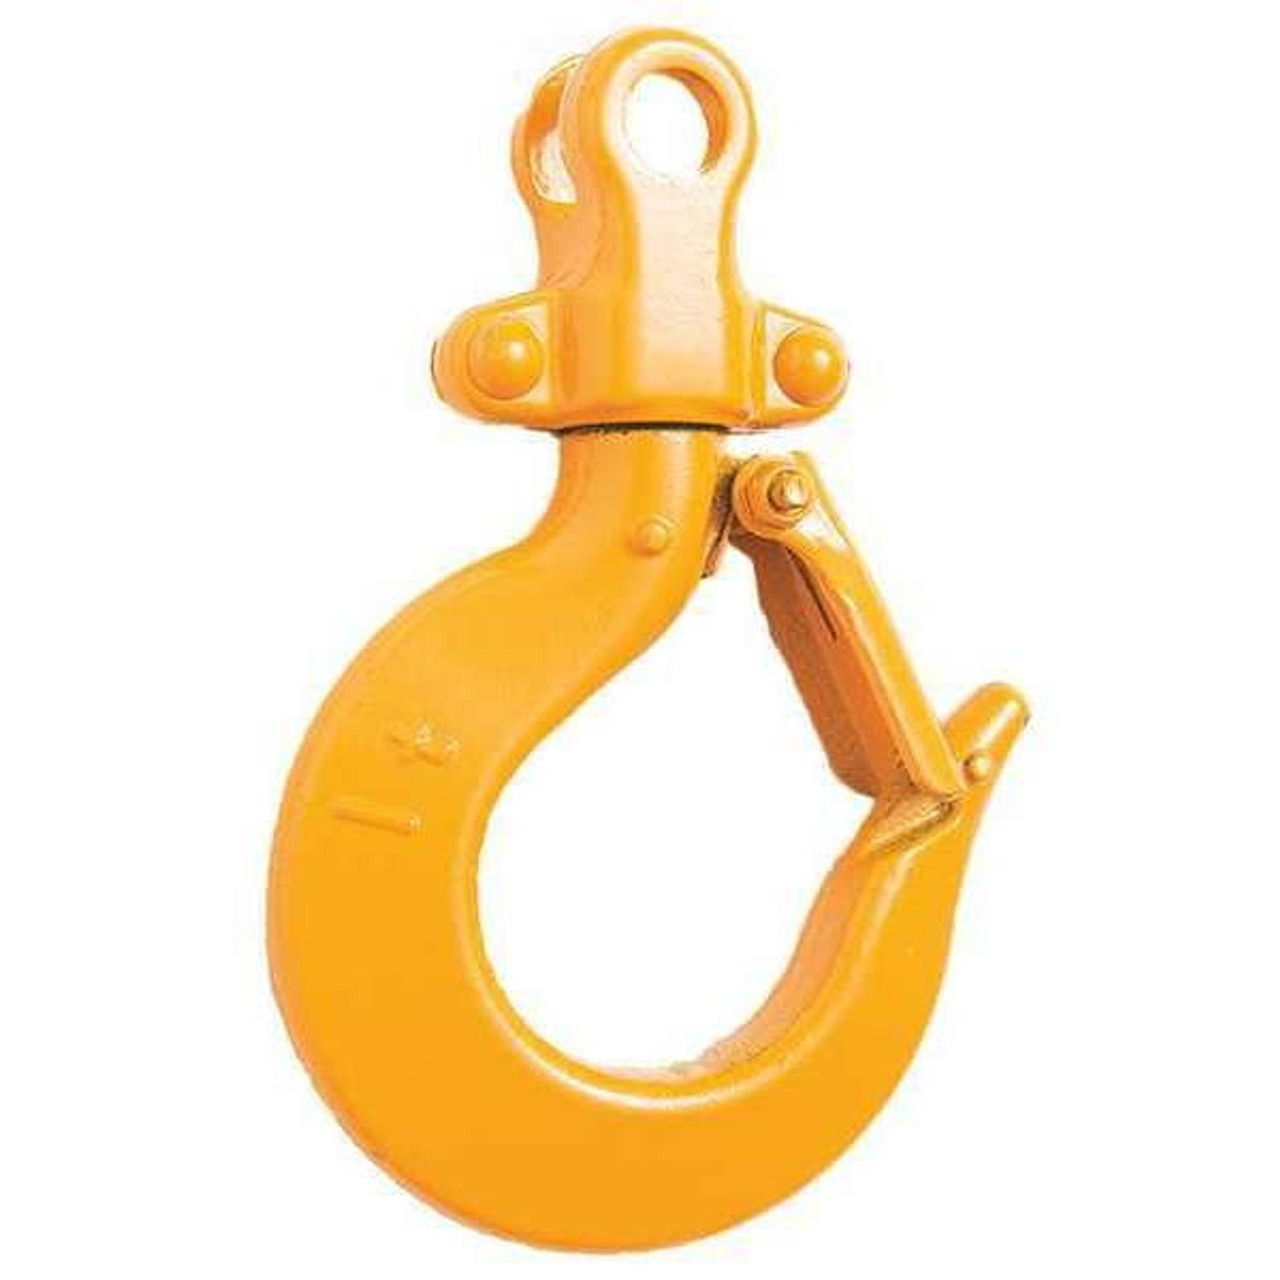 Top Hook Assembly, Product Type Top Hook Assembly, Compatible Hoist Type Lever Chain Hoists, Compatible Load Capacity 3,000 lb, Compatible Series L5LB, Material Carbon Steel, Overall Length Not Applicable, Overall Width 4.1 in, Overall Height Not Applicable, Includes Safety Latch